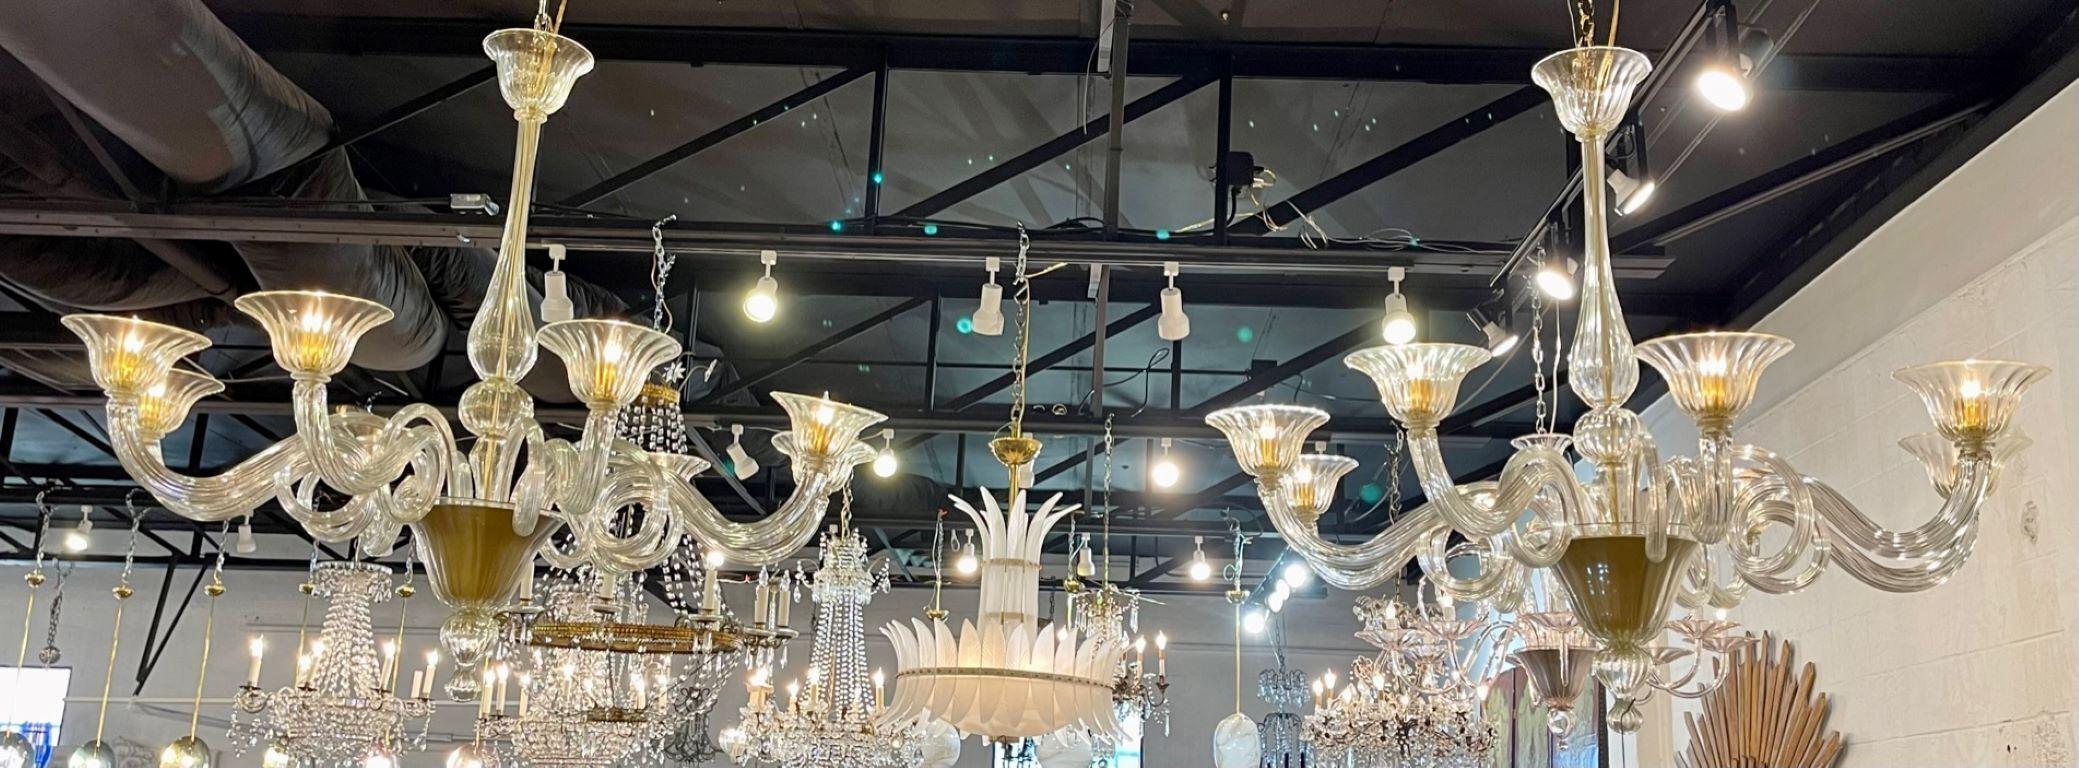 Gorgeous pair of Modern gold Murano glass chandeliers. Beautiful glistening glass and curly-que arms. These are extra special and a real work of art!